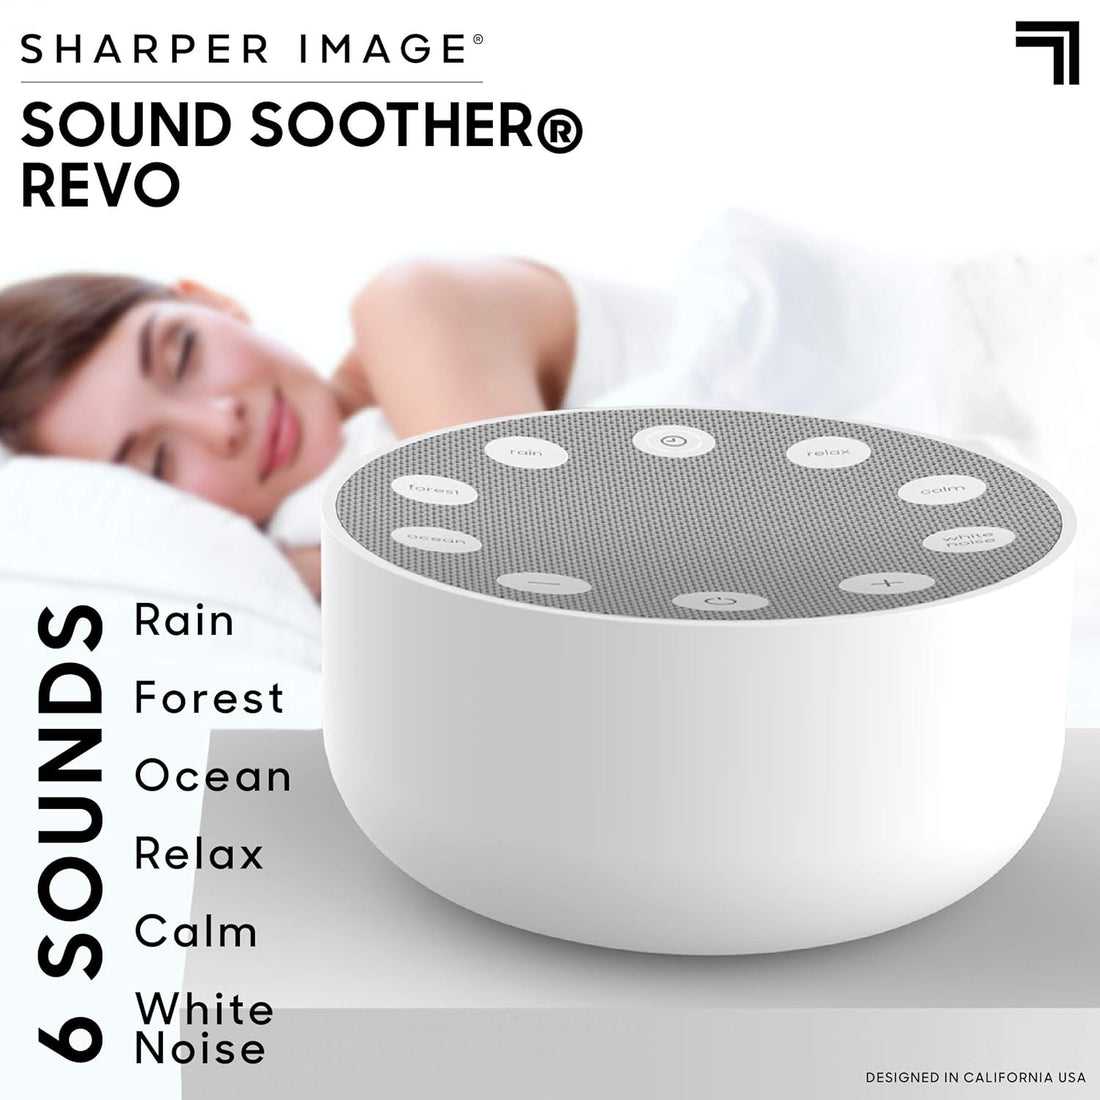 SHARPER IMAGE Sleep Therapy White Noise Machine, Soothing Nature Sounds for Baby Kid Adult, Portable Relaxation Wellness Meditation and Naps, Peaceful Rest Sleep Aid, Holiday Gift